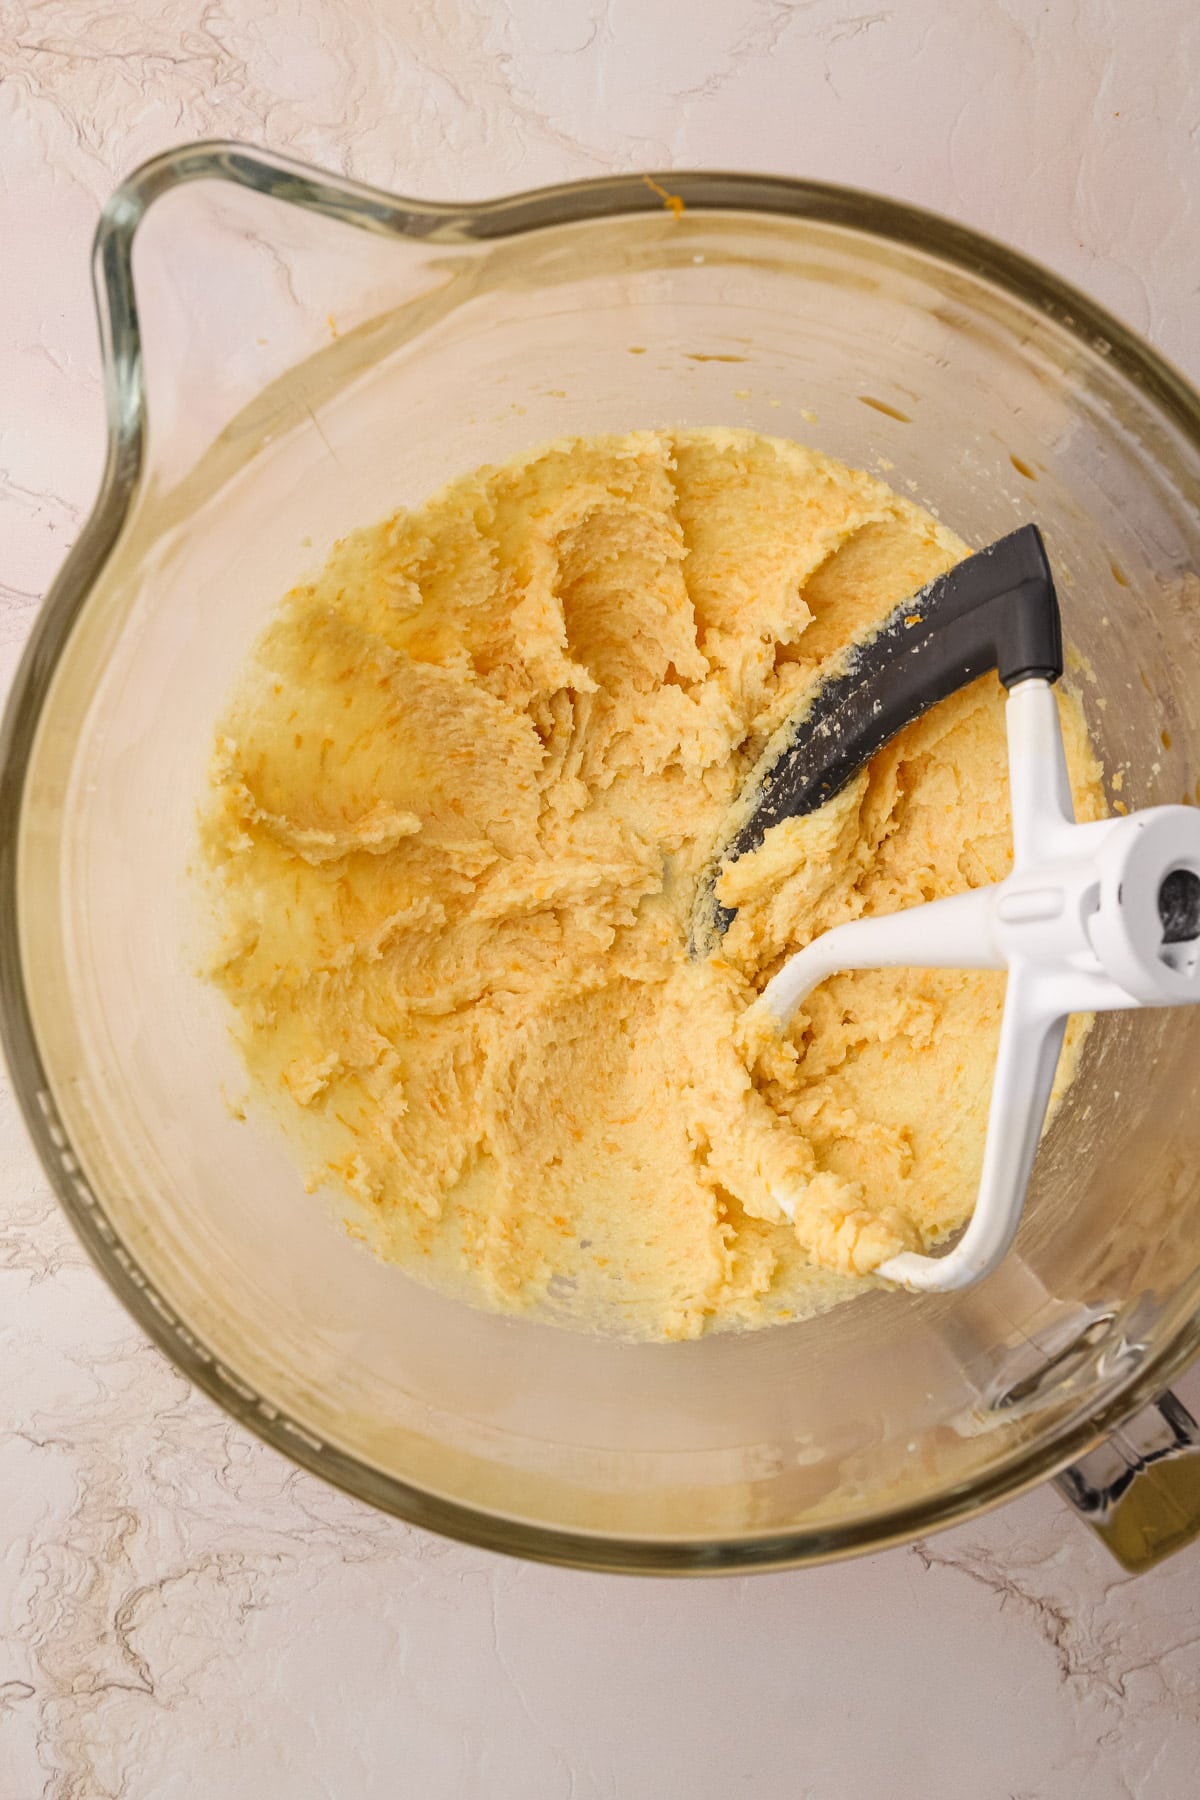 Creamed butter and orange extract in a mixing bowl.